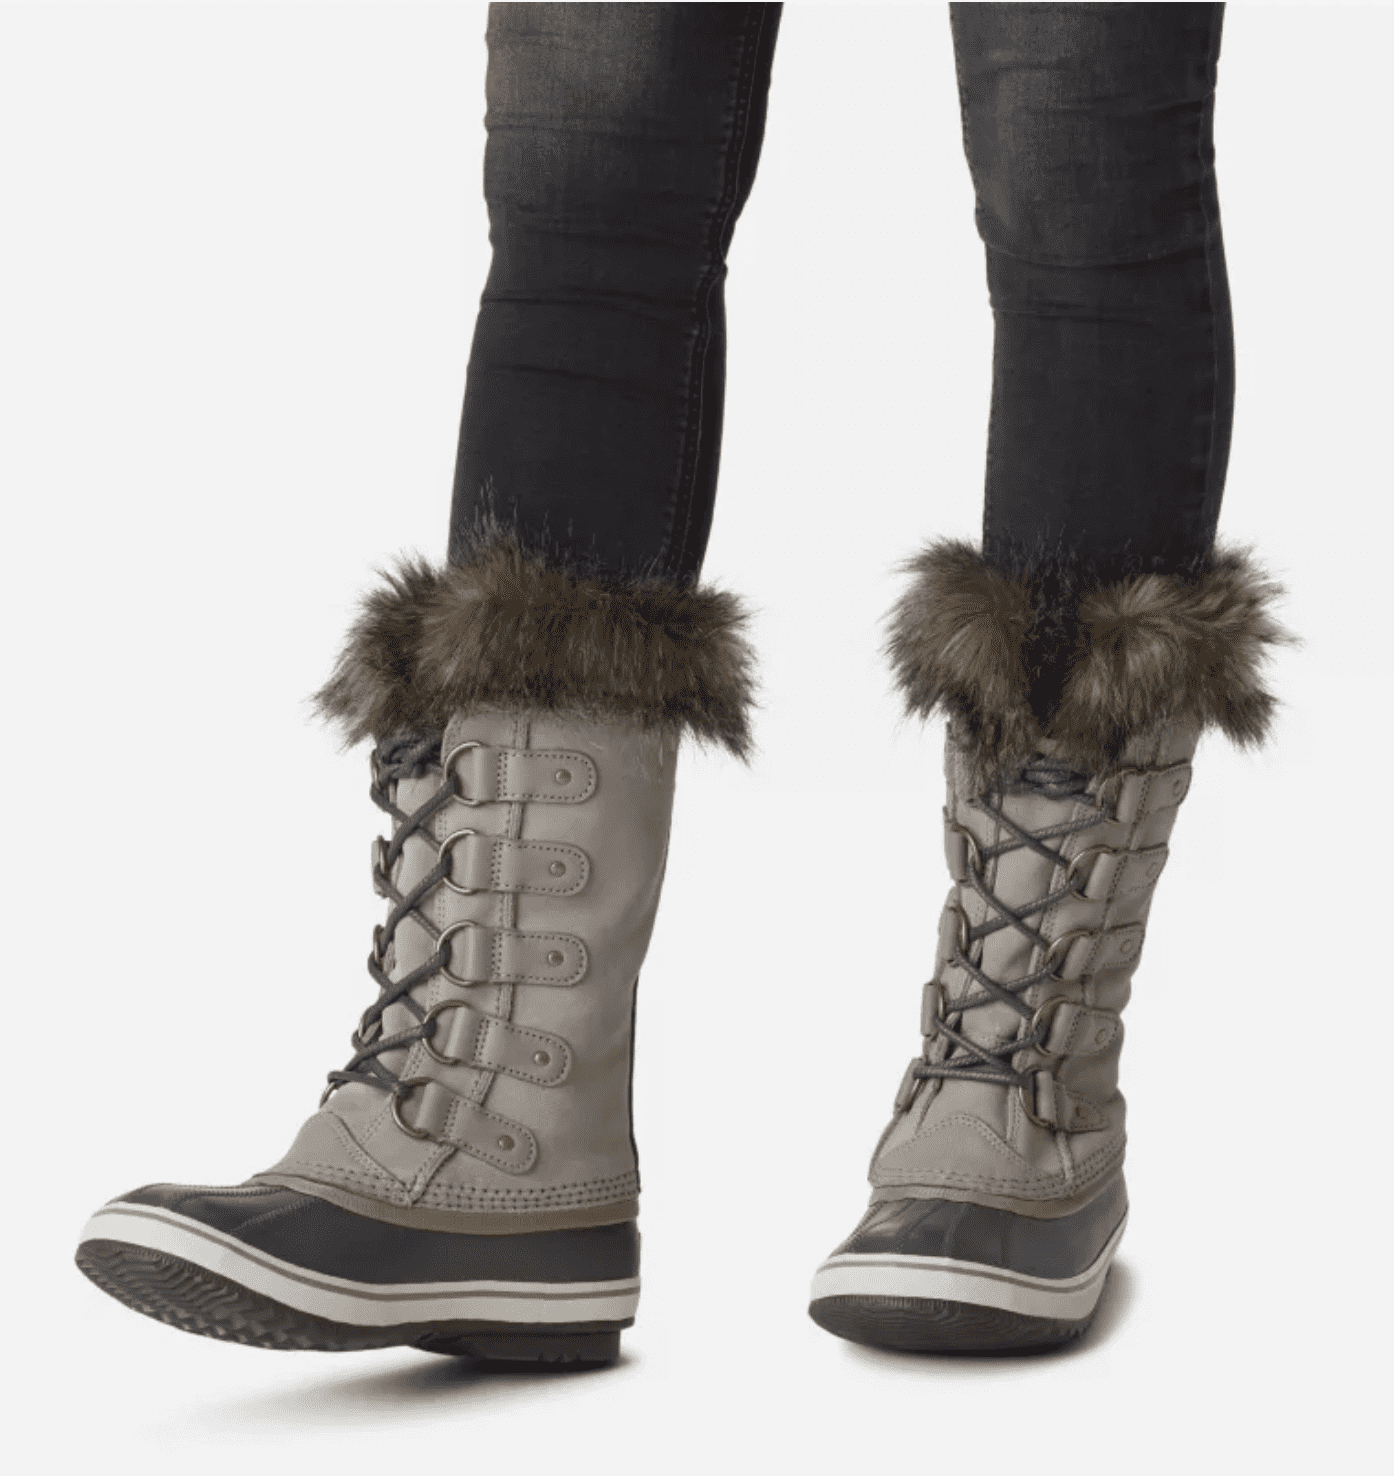 Sorel: Up to 50% off Winter Sale.